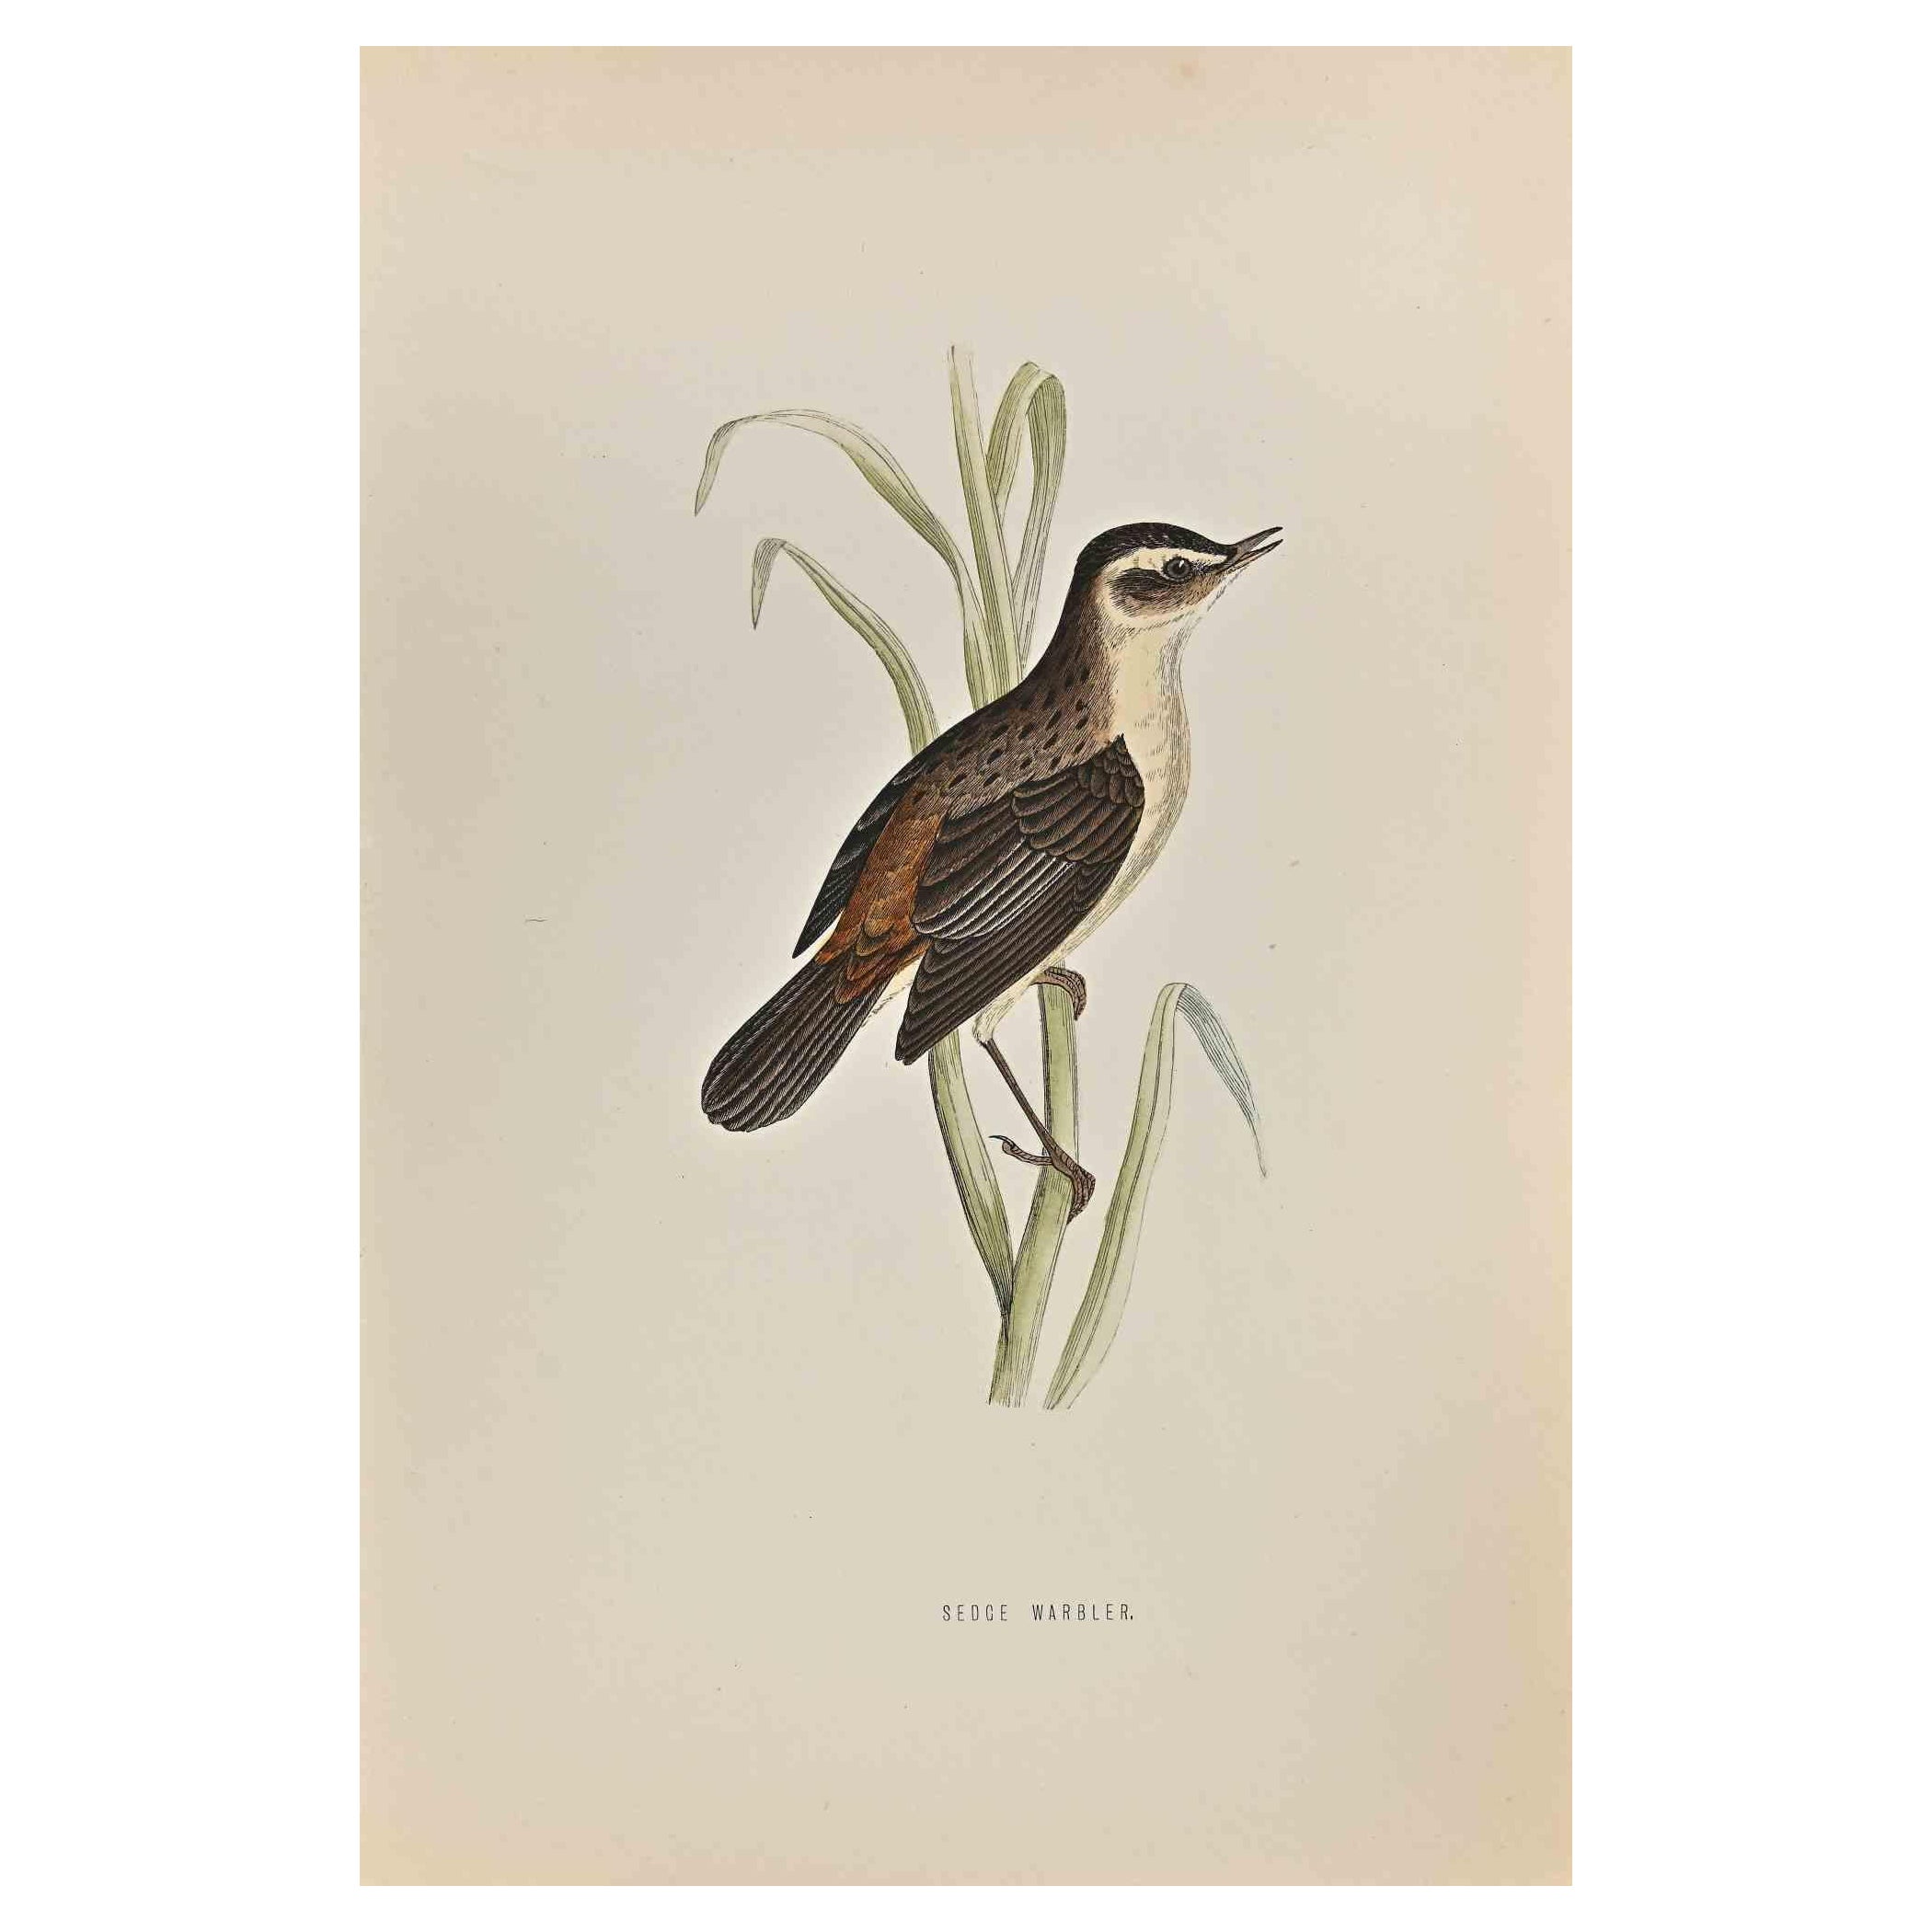  Sedge Warbler is a modern artwork realized in 1870 by the British artist Alexander Francis Lydon (1836-1917) . 

Woodcut print, hand colored, published by London, Bell & Sons, 1870.  Name of the bird printed in plate. This work is part of a print